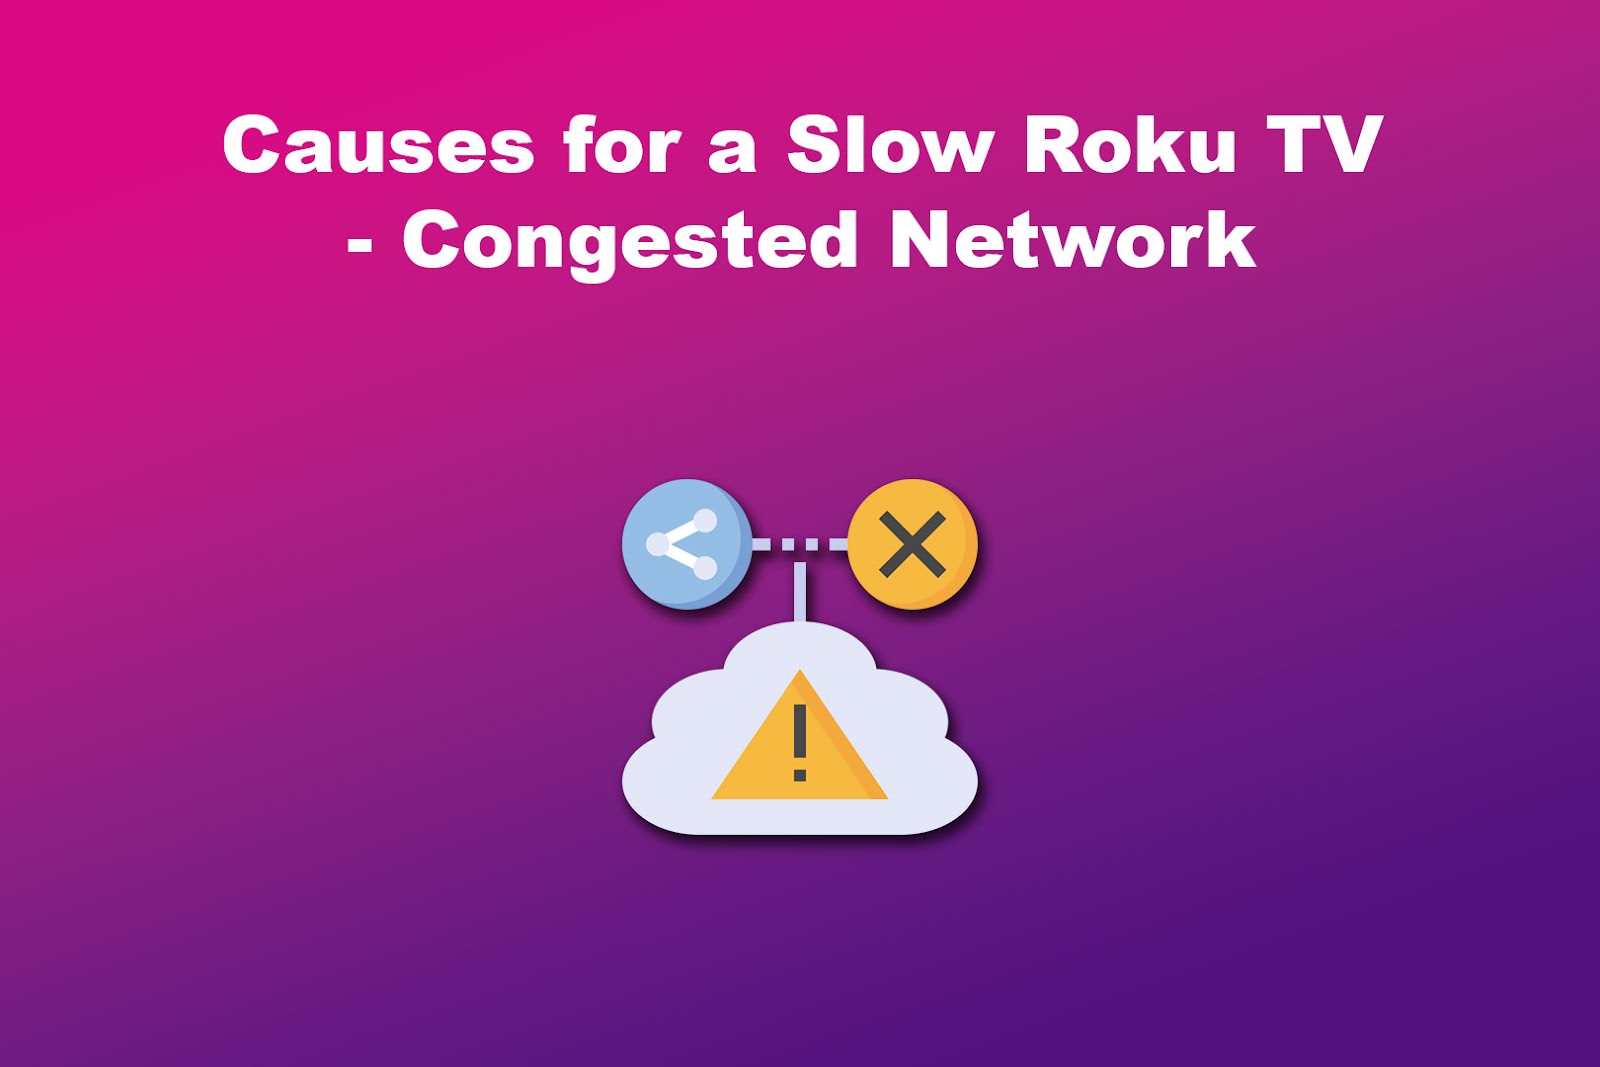 Causes for a Slow Roku TV